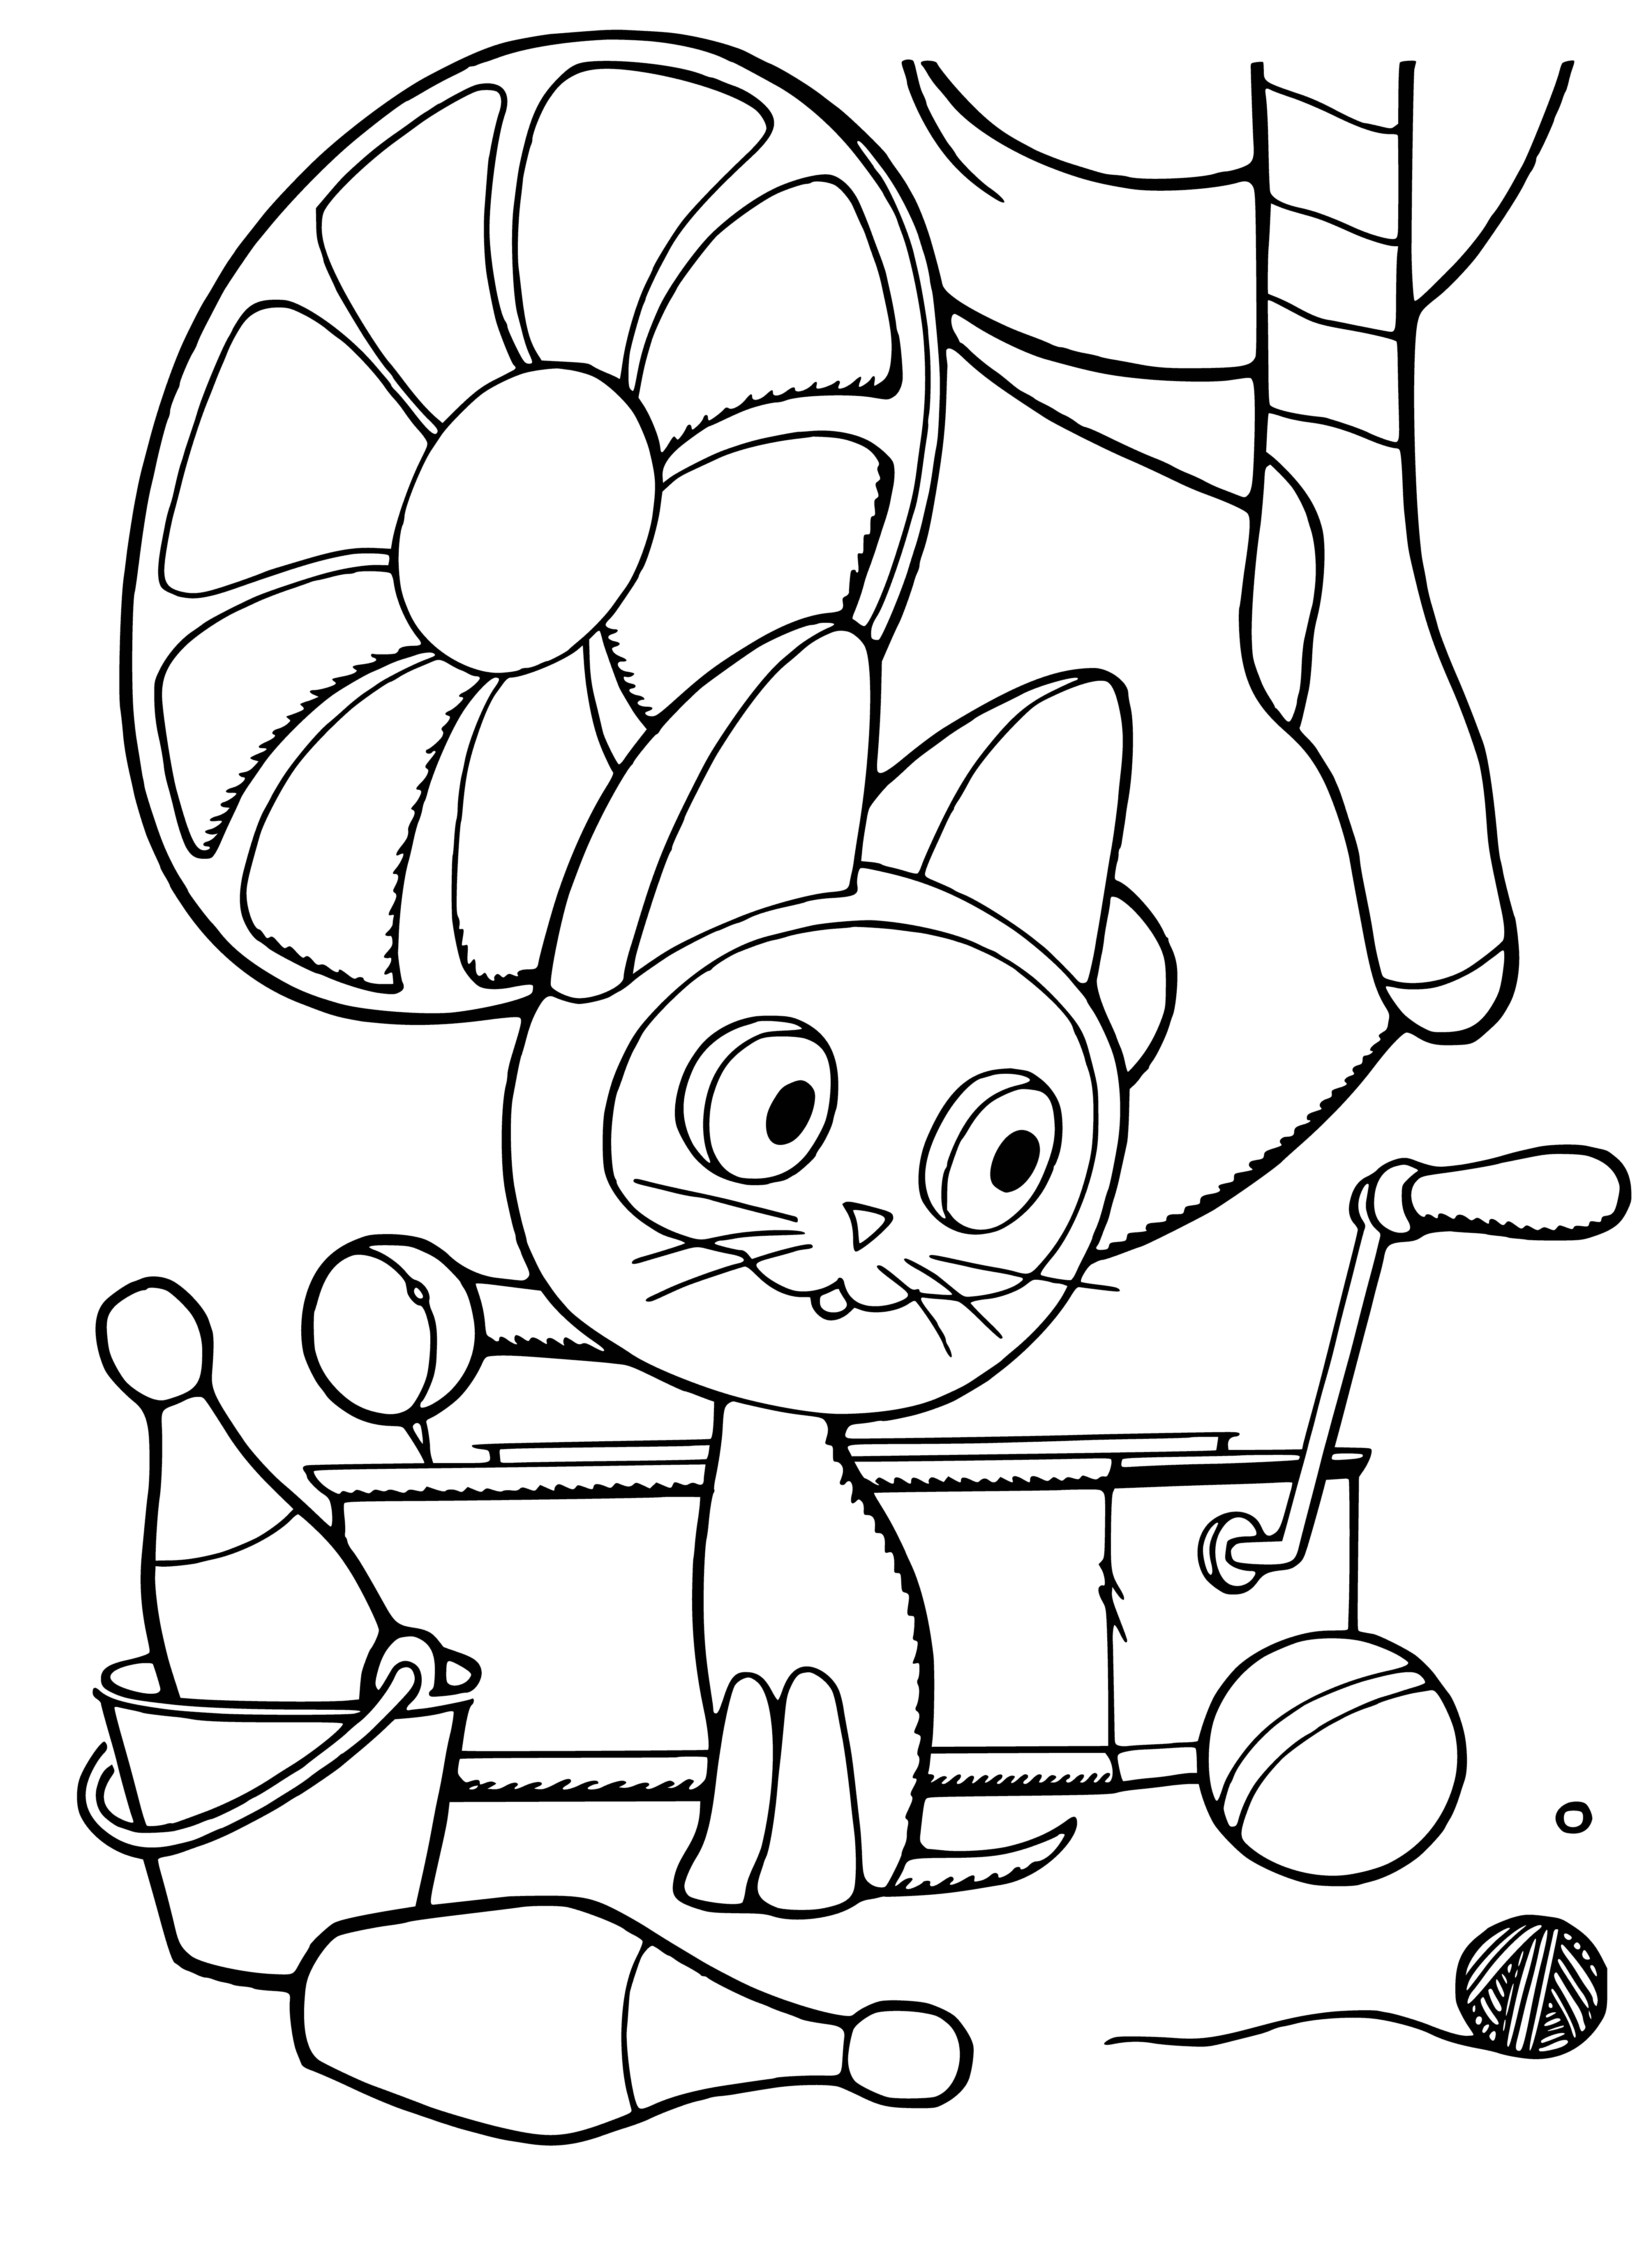 coloring page: Silver and white kitten Woof is in an attic with a red blanket and window.